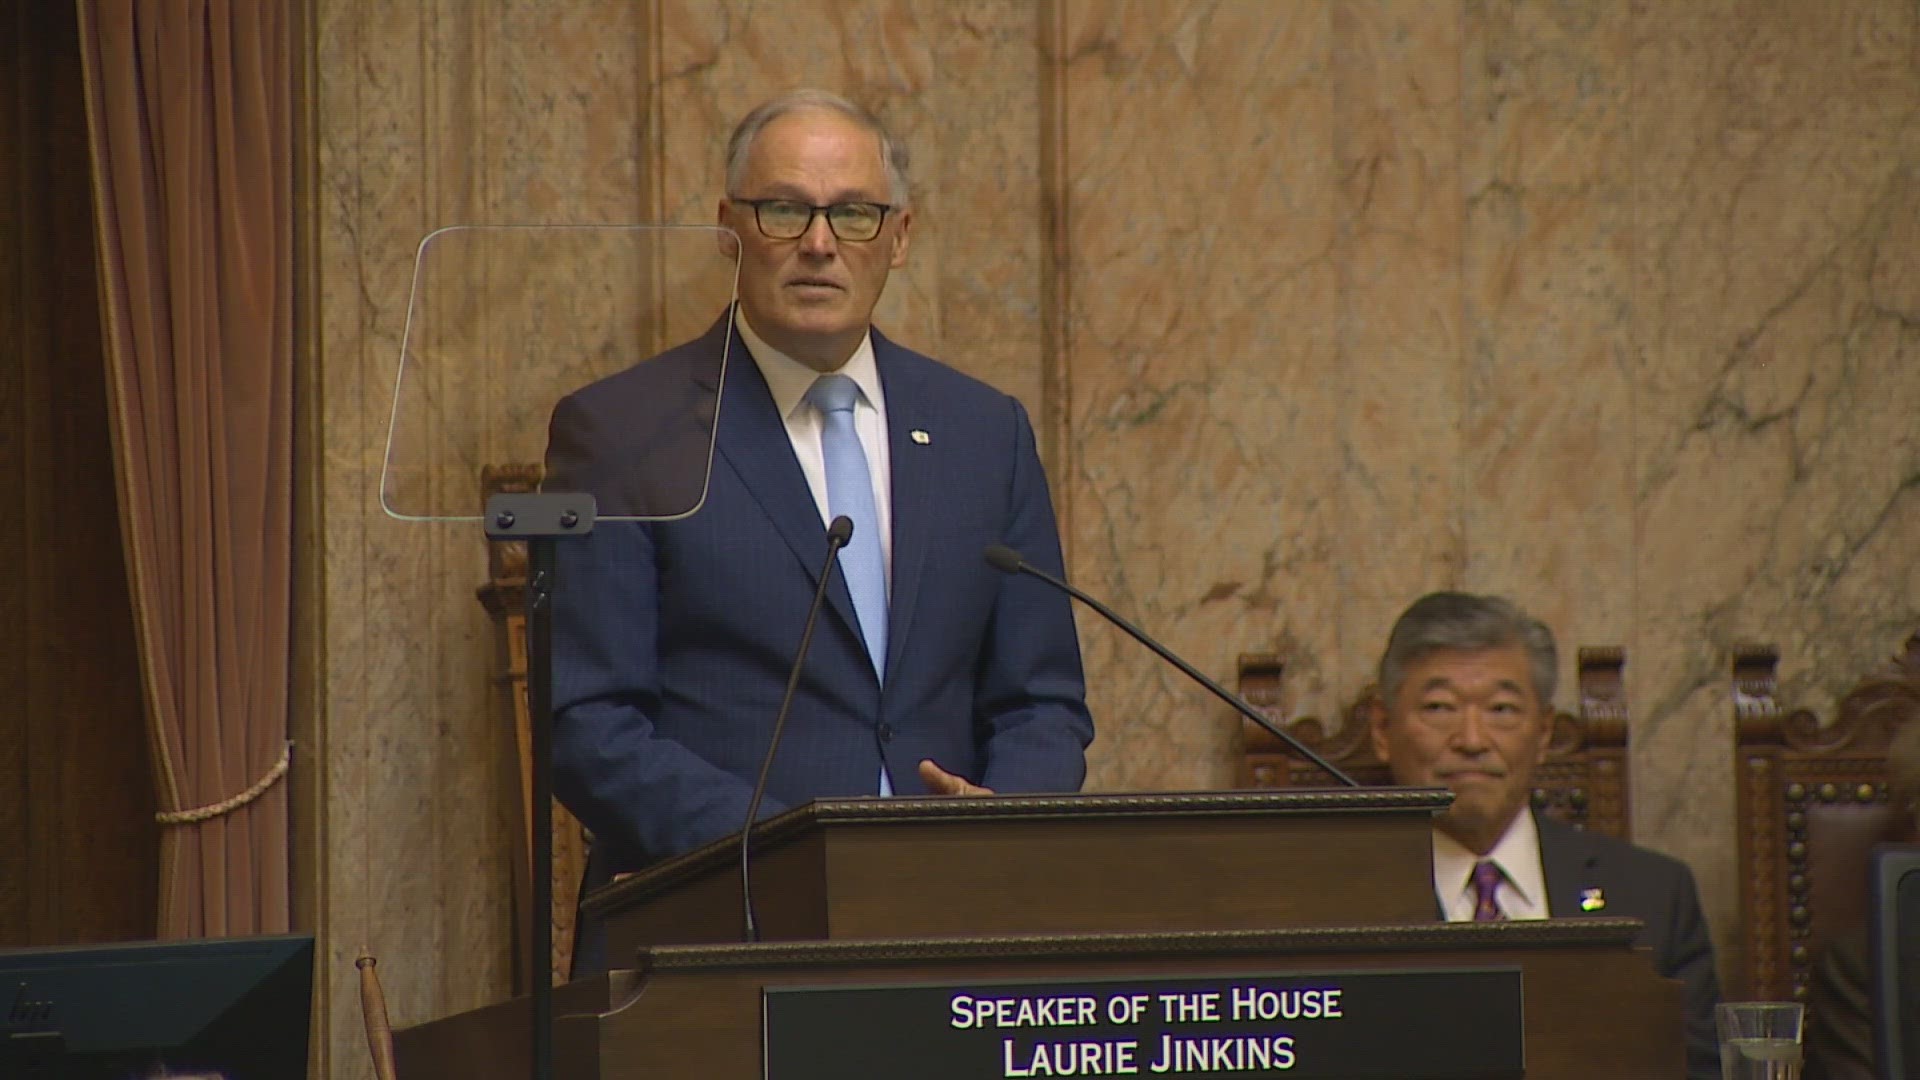 In Inslee's 11th State of the State address, the governor highlighted the state's improved economy, climate change proposals and increased police funding.